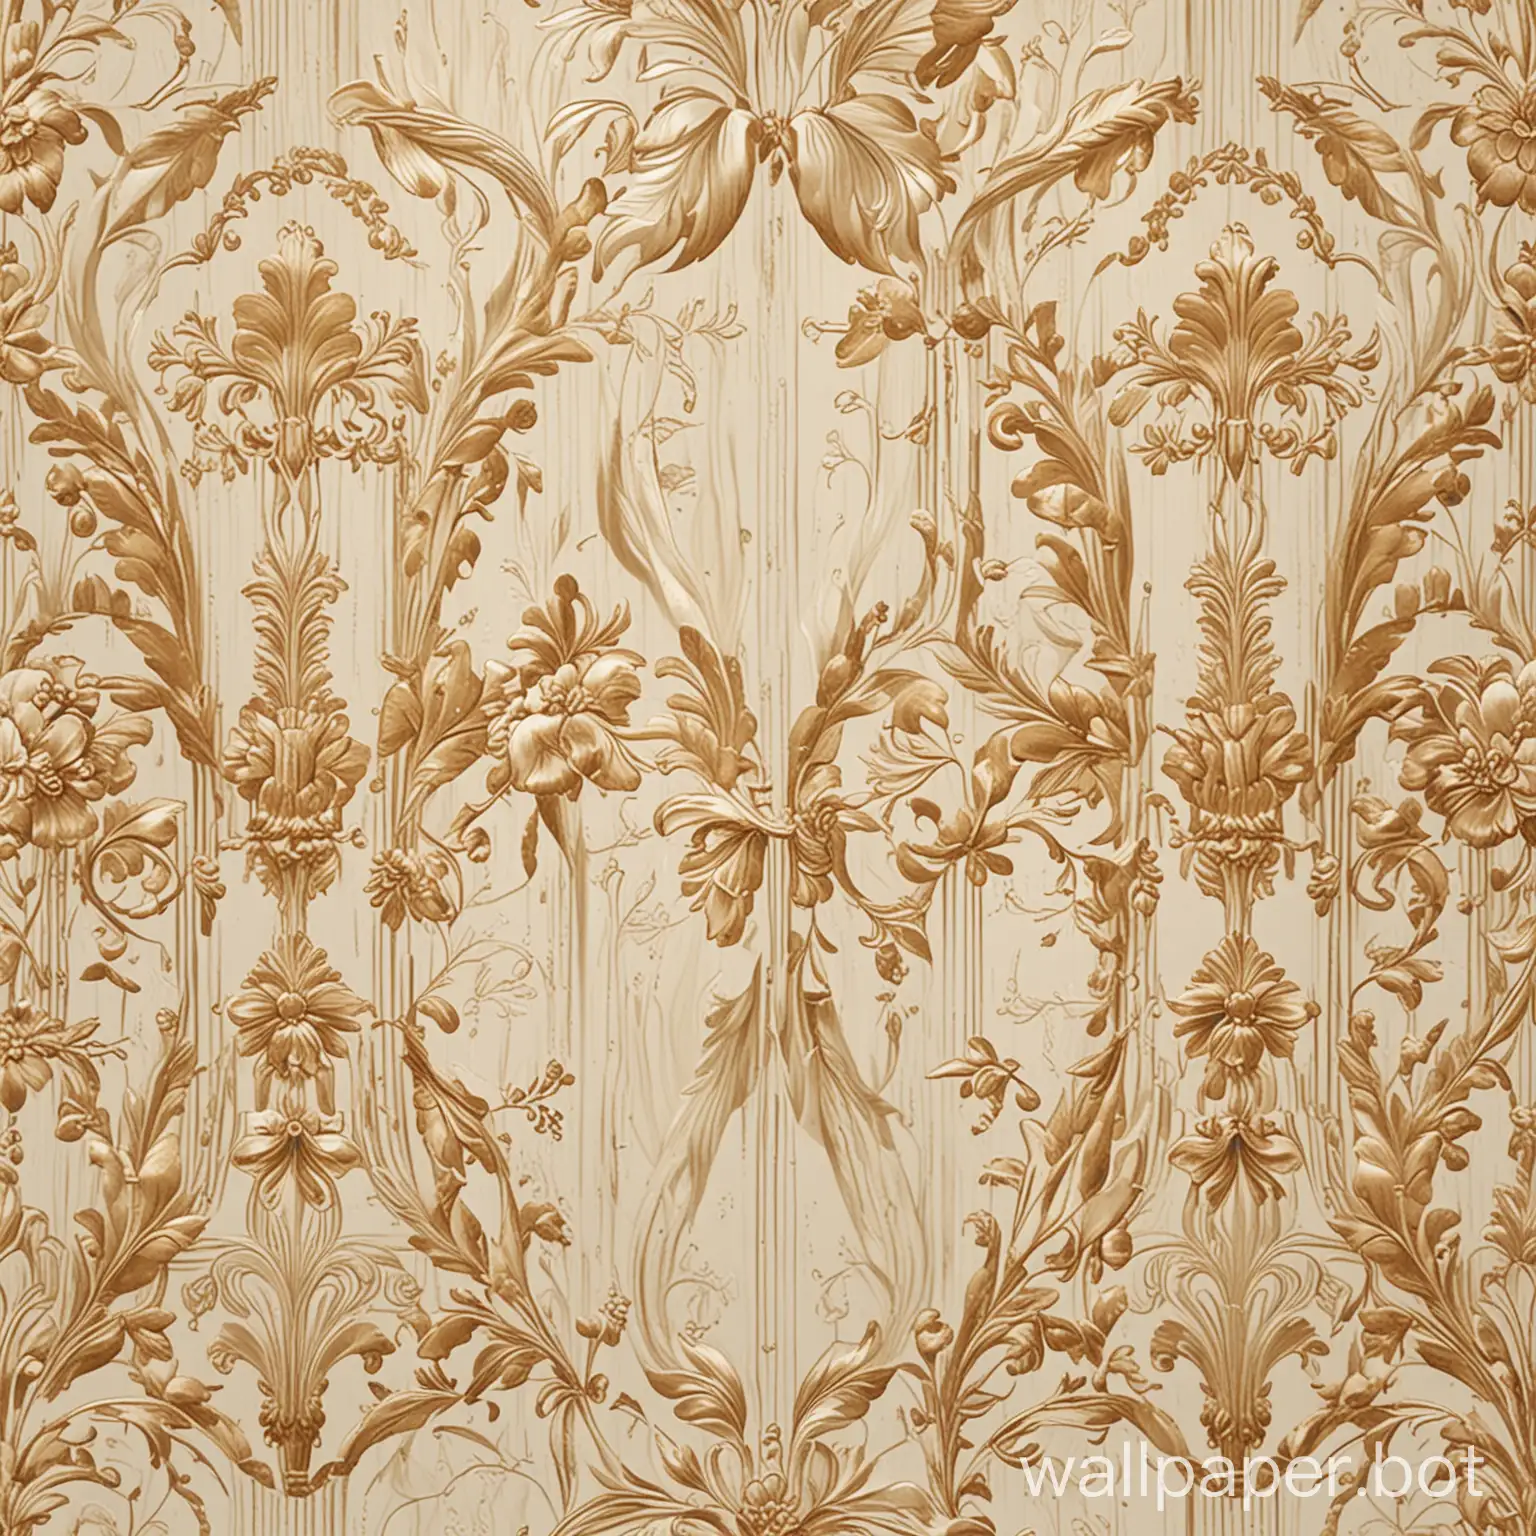 create a 8k resolution at 200dpi in sRGB image profile vintage inspired repeating pattern reminiscent of art deco ere, in a French cottage shabby chick style in cream, ivory, gold.